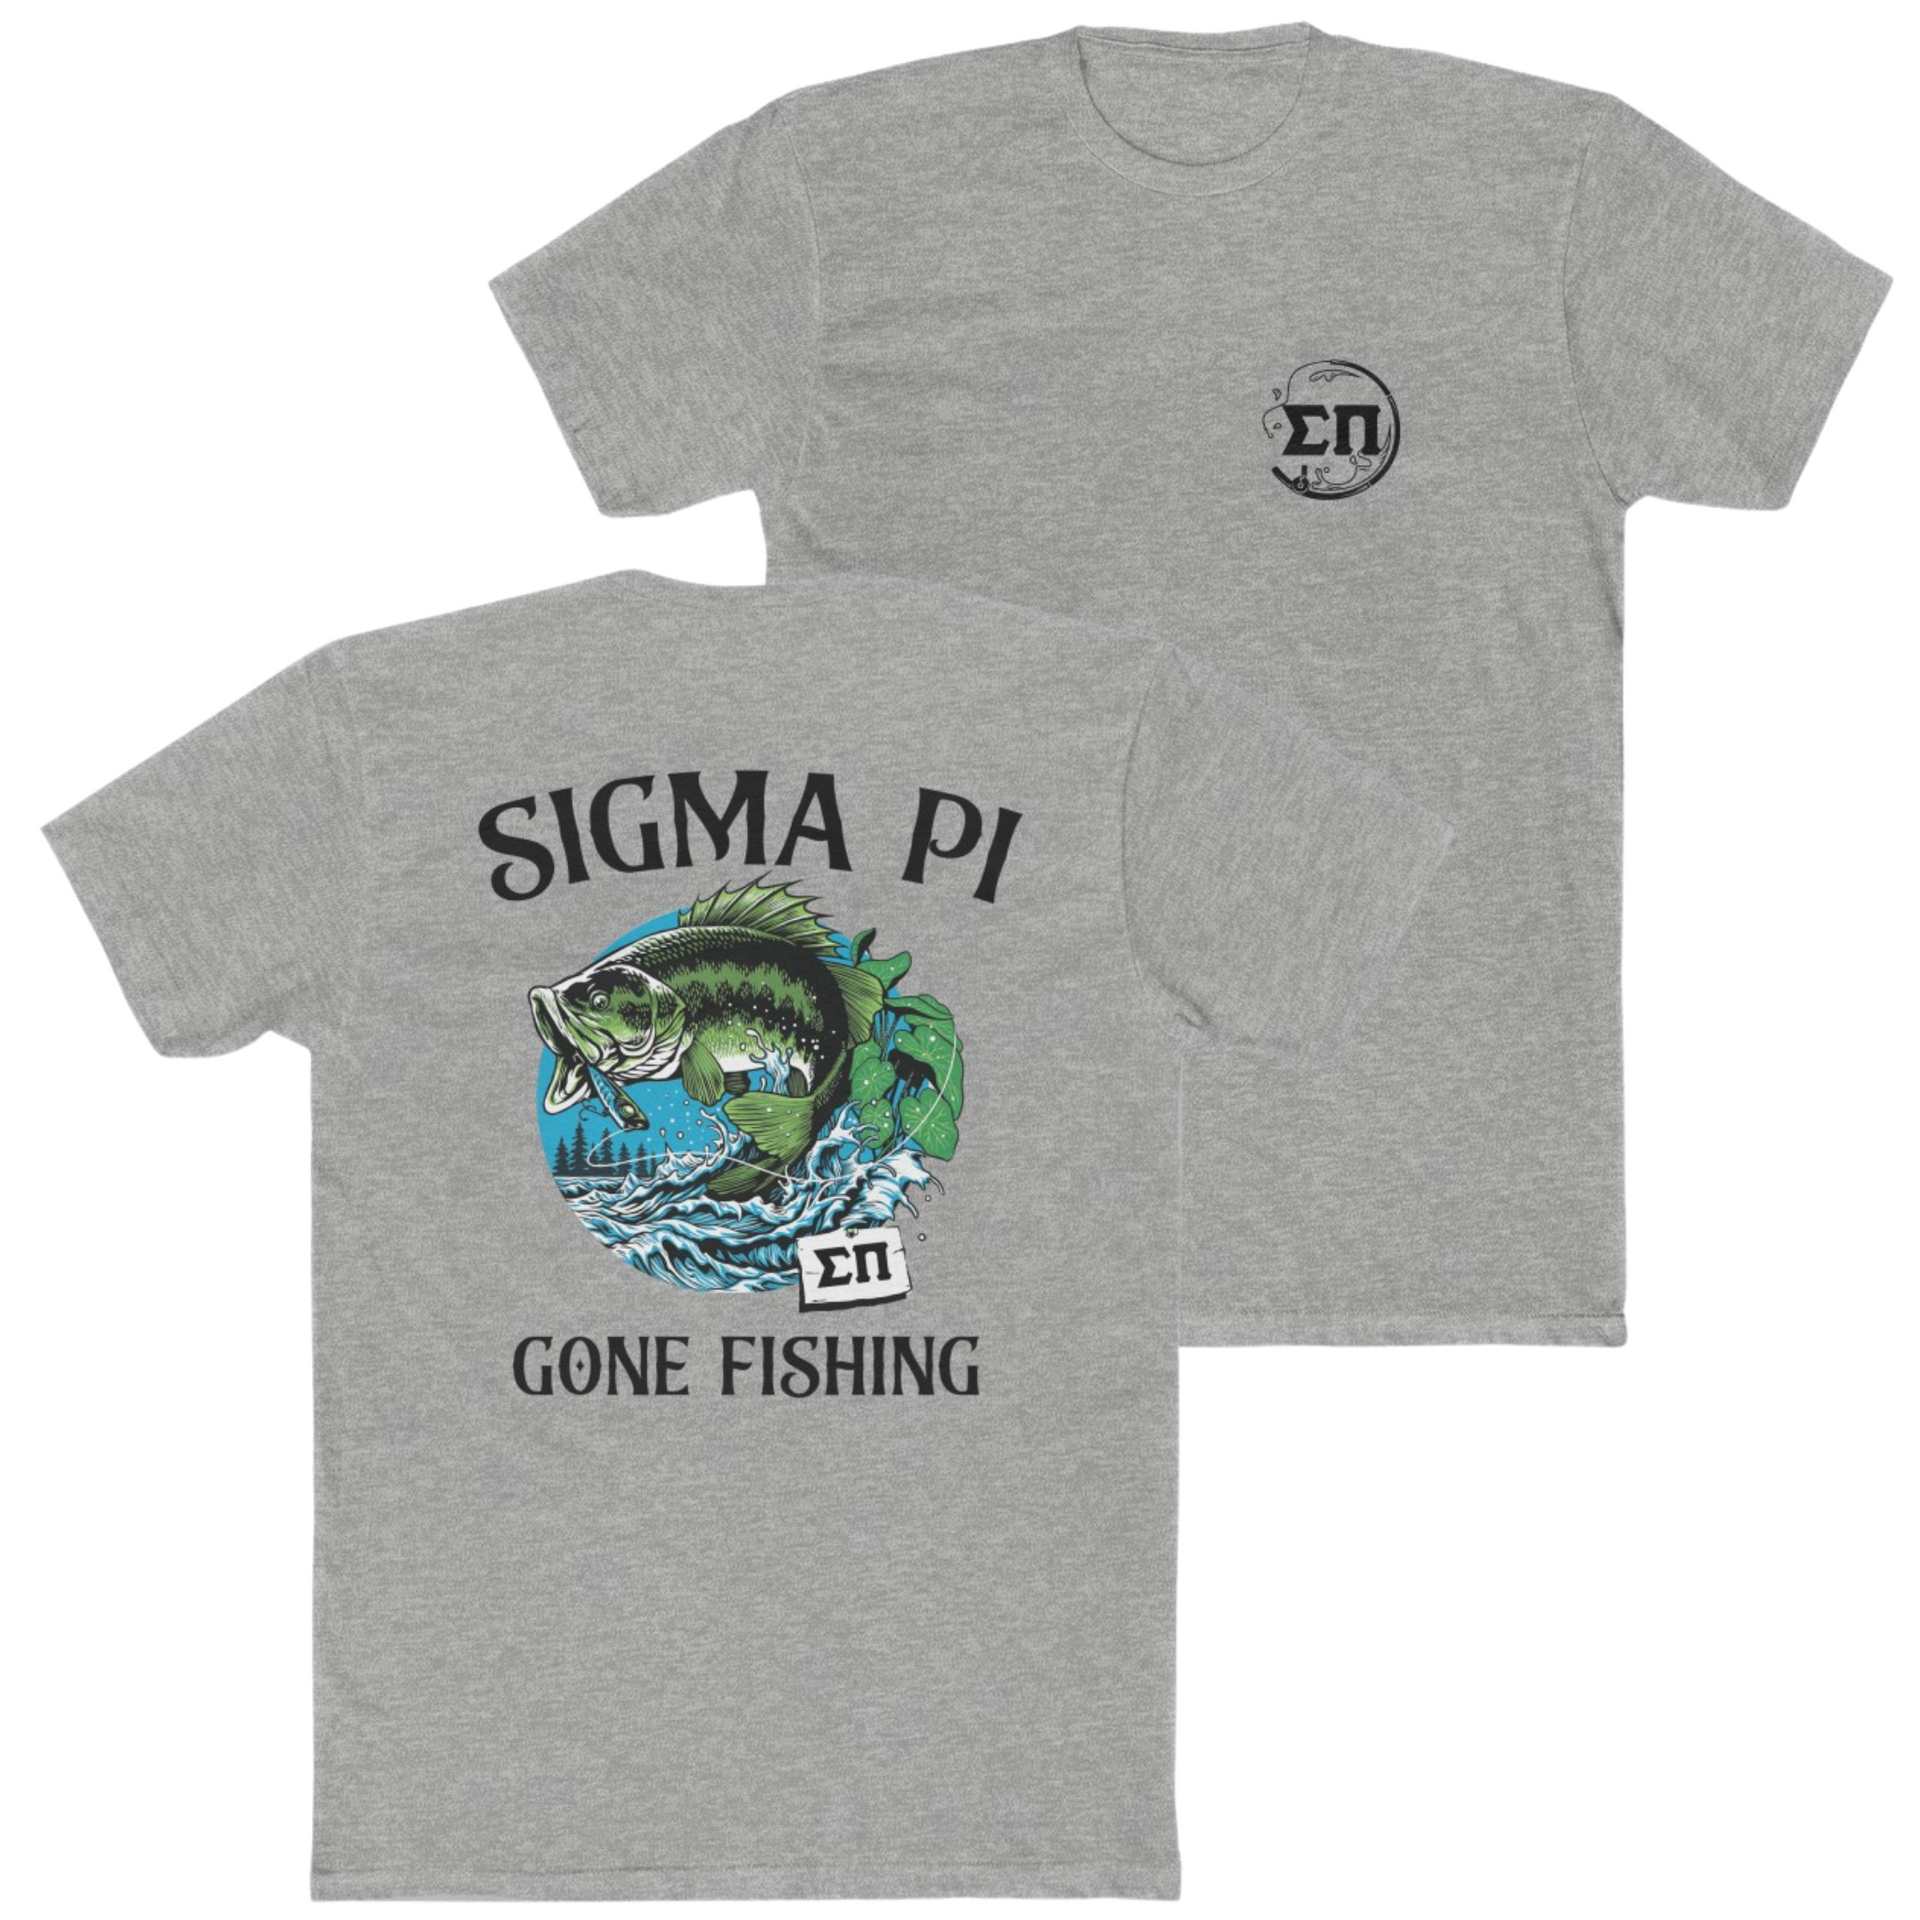 Grey Sigma Pi Graphic T-Shirt | Gone Fishing | Sigma Pi Apparel and Merchandise 